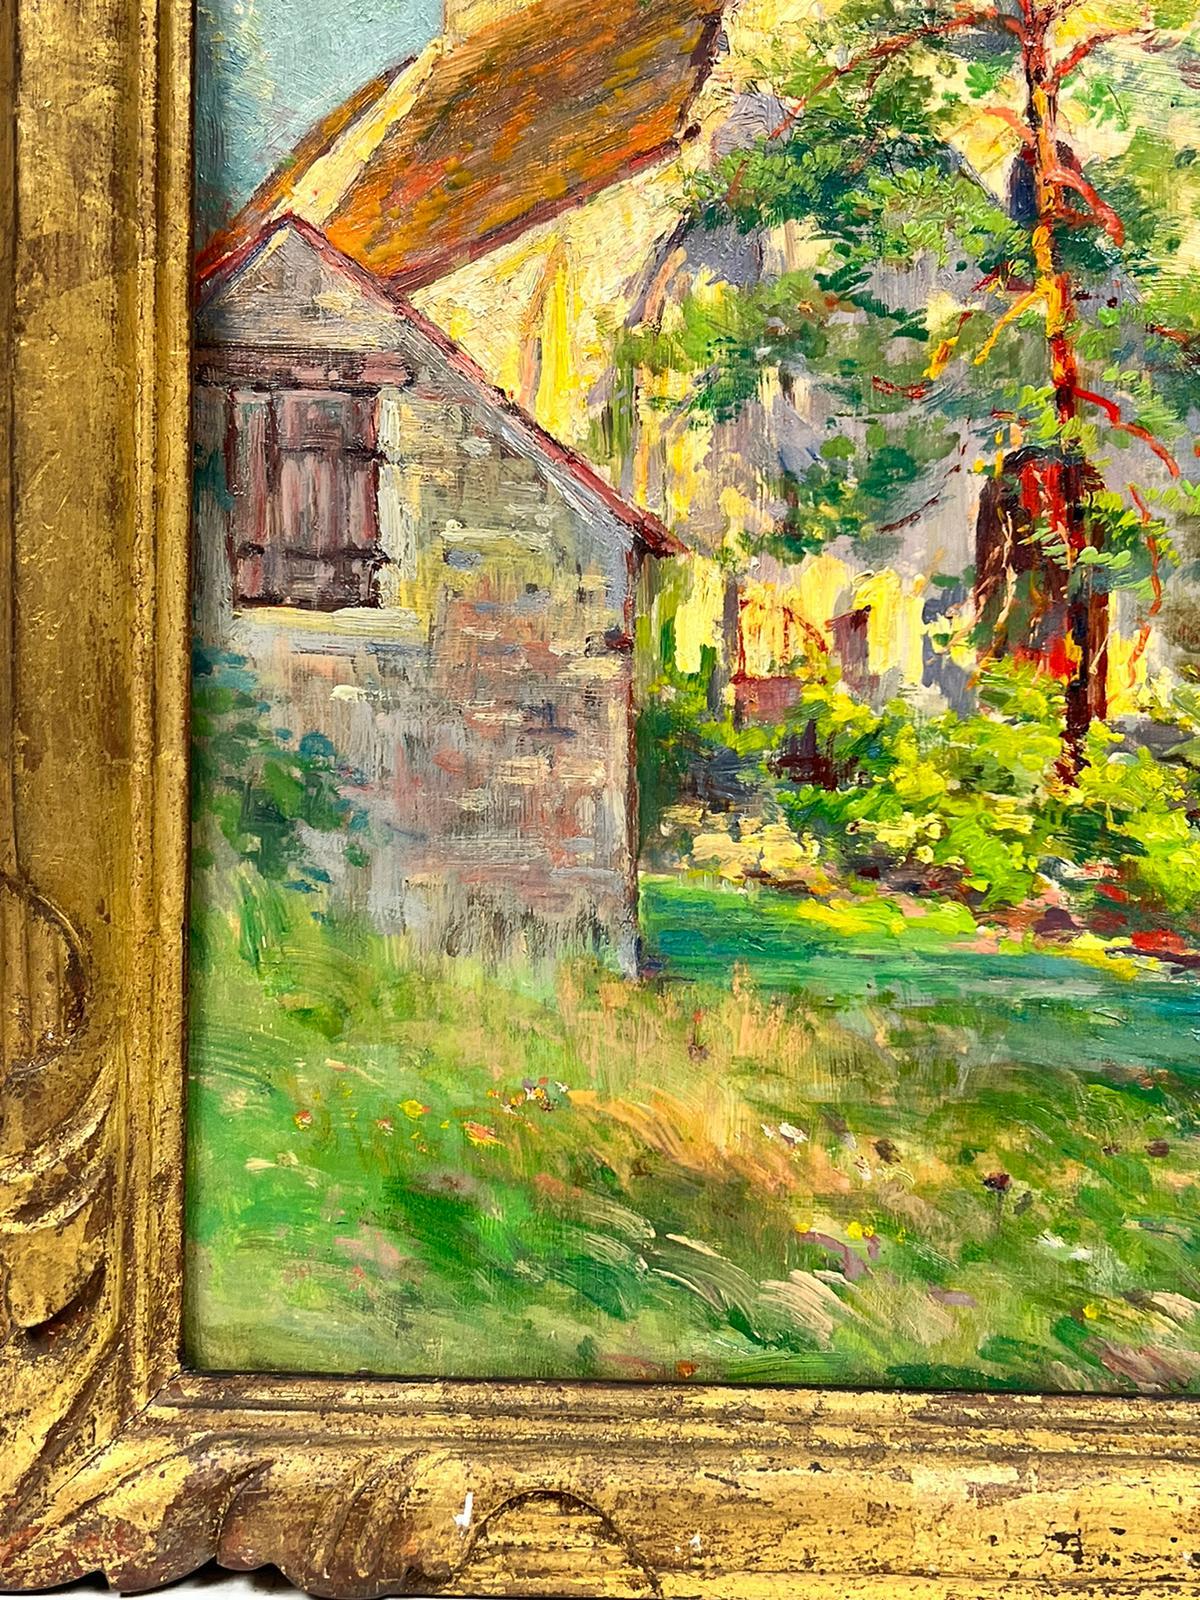 French School, circa 1950’s
oil painting on board, framed
framed: 16 x 12 inches
board: 14 x 9.5  inches
provenance: private collection, France
condition: overall very good